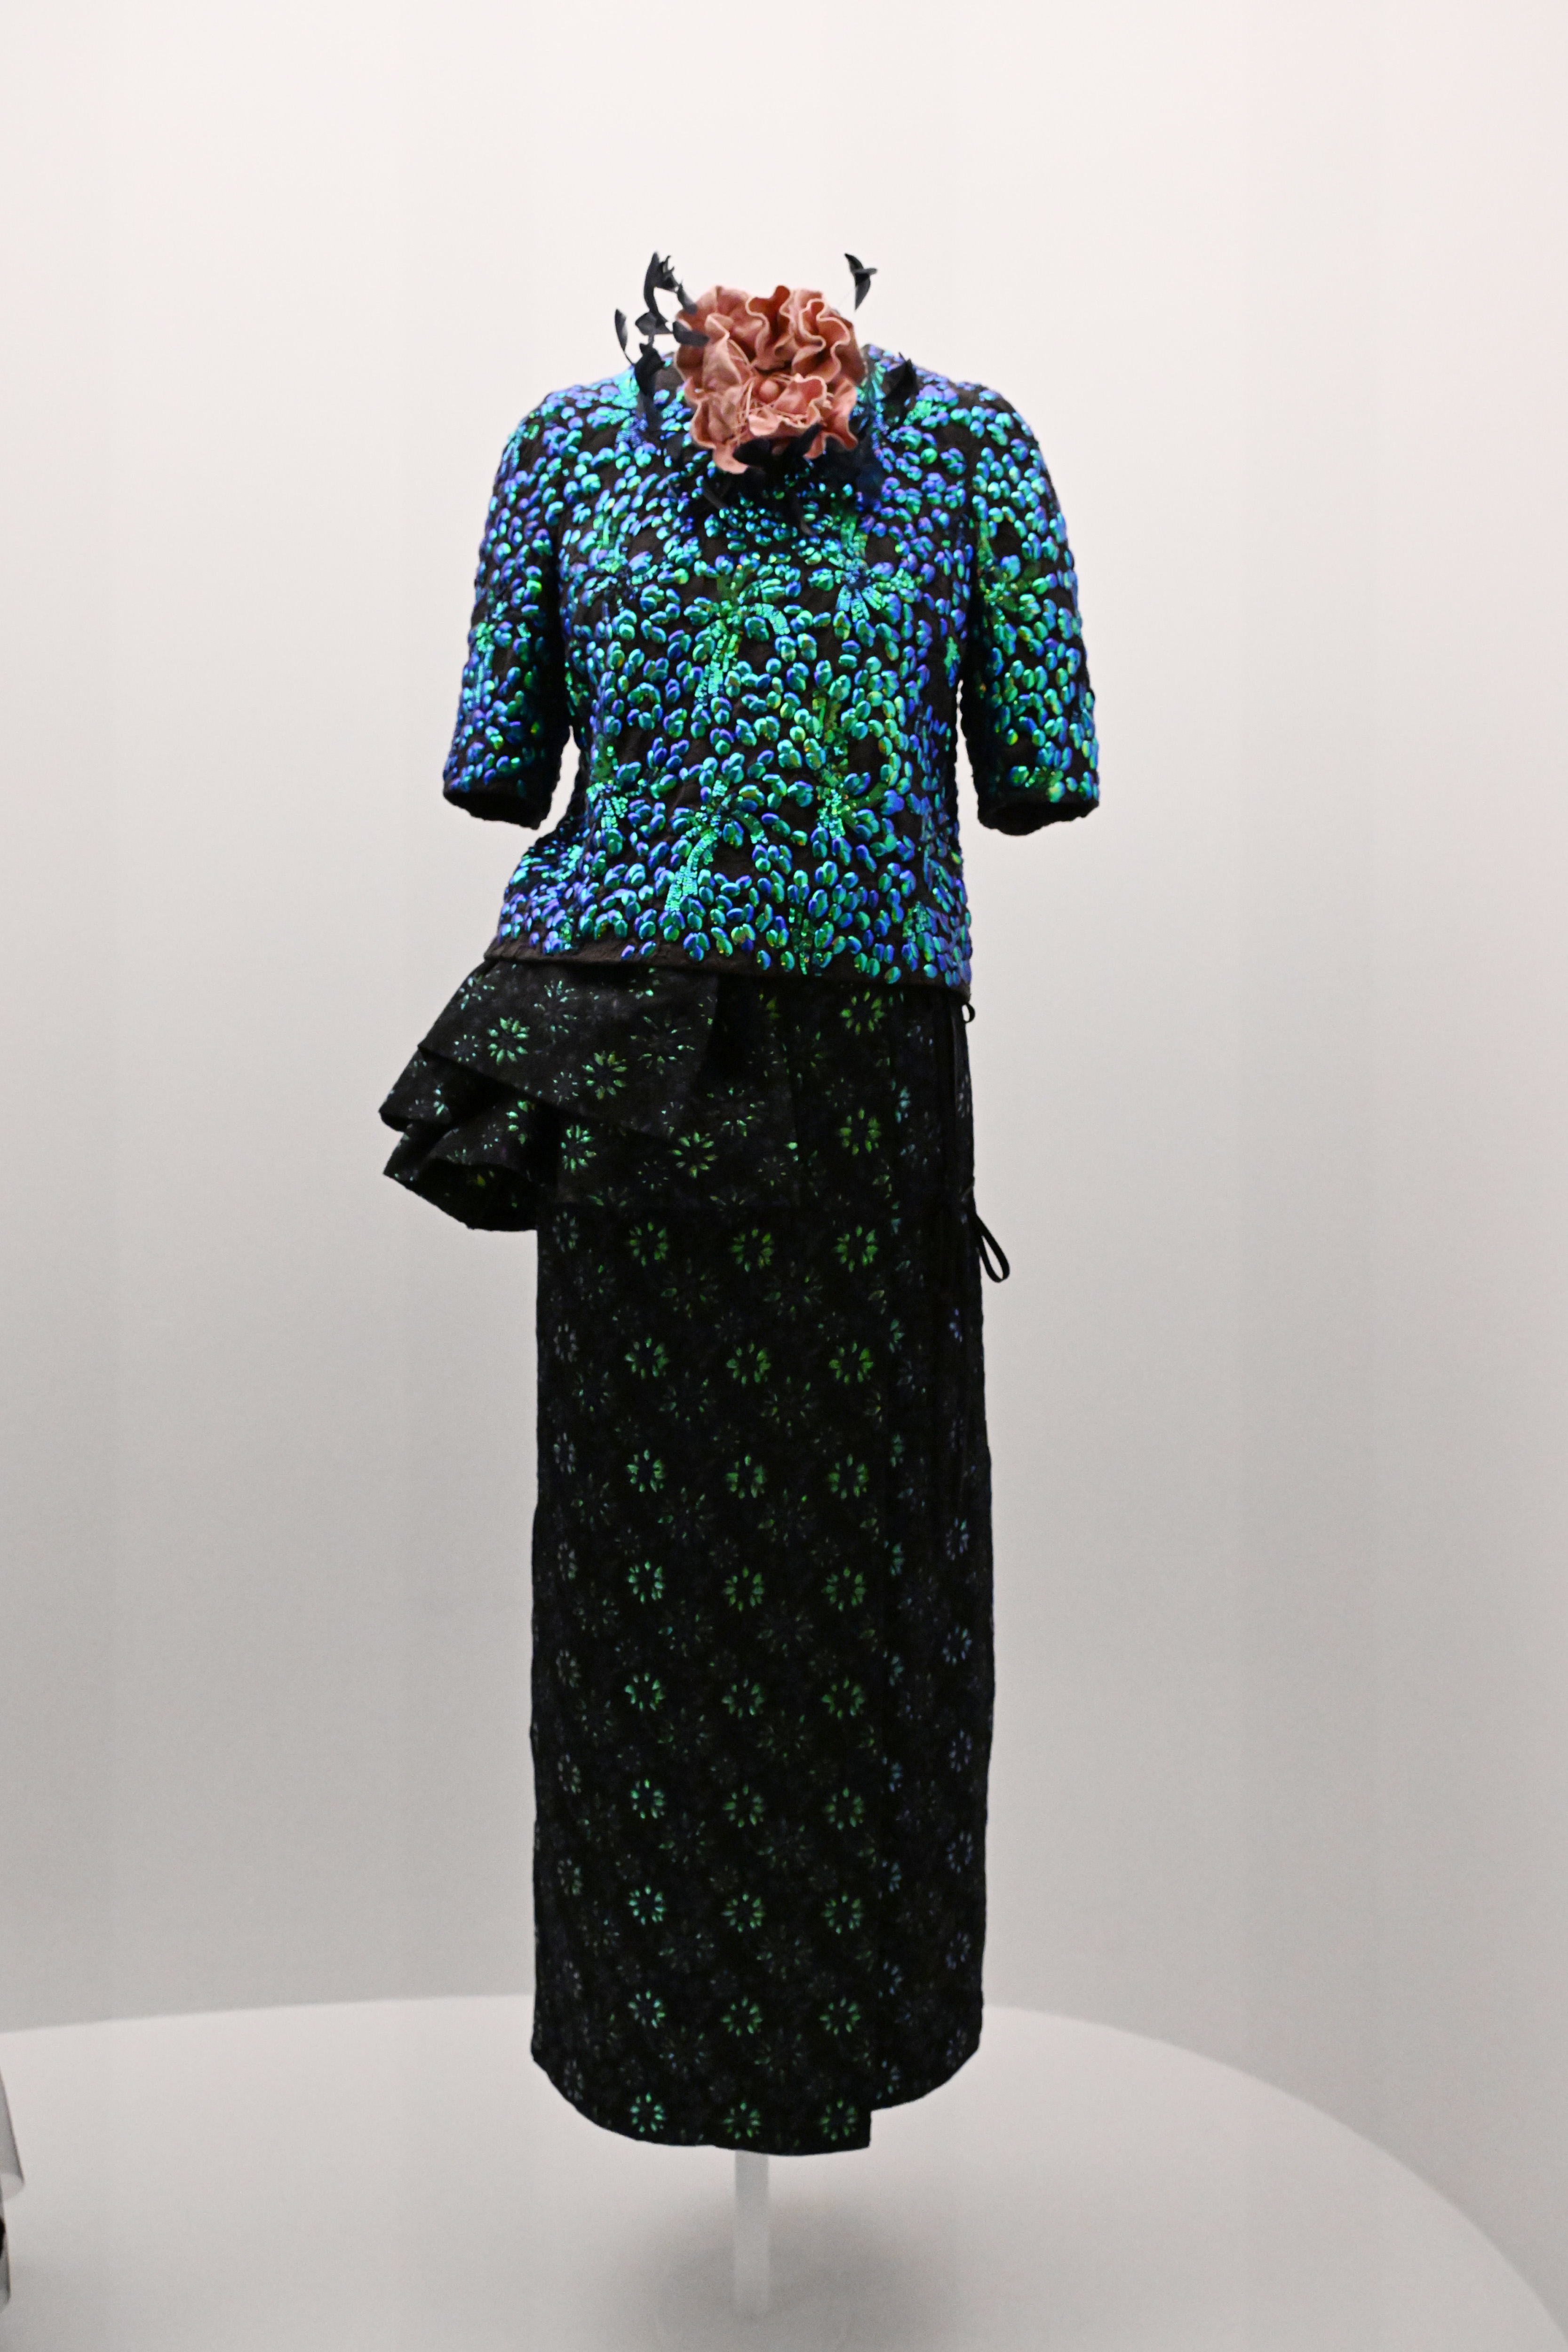 Sequin-embellished top with matching skirt on a mannequin, accessorized with a floral headpiece